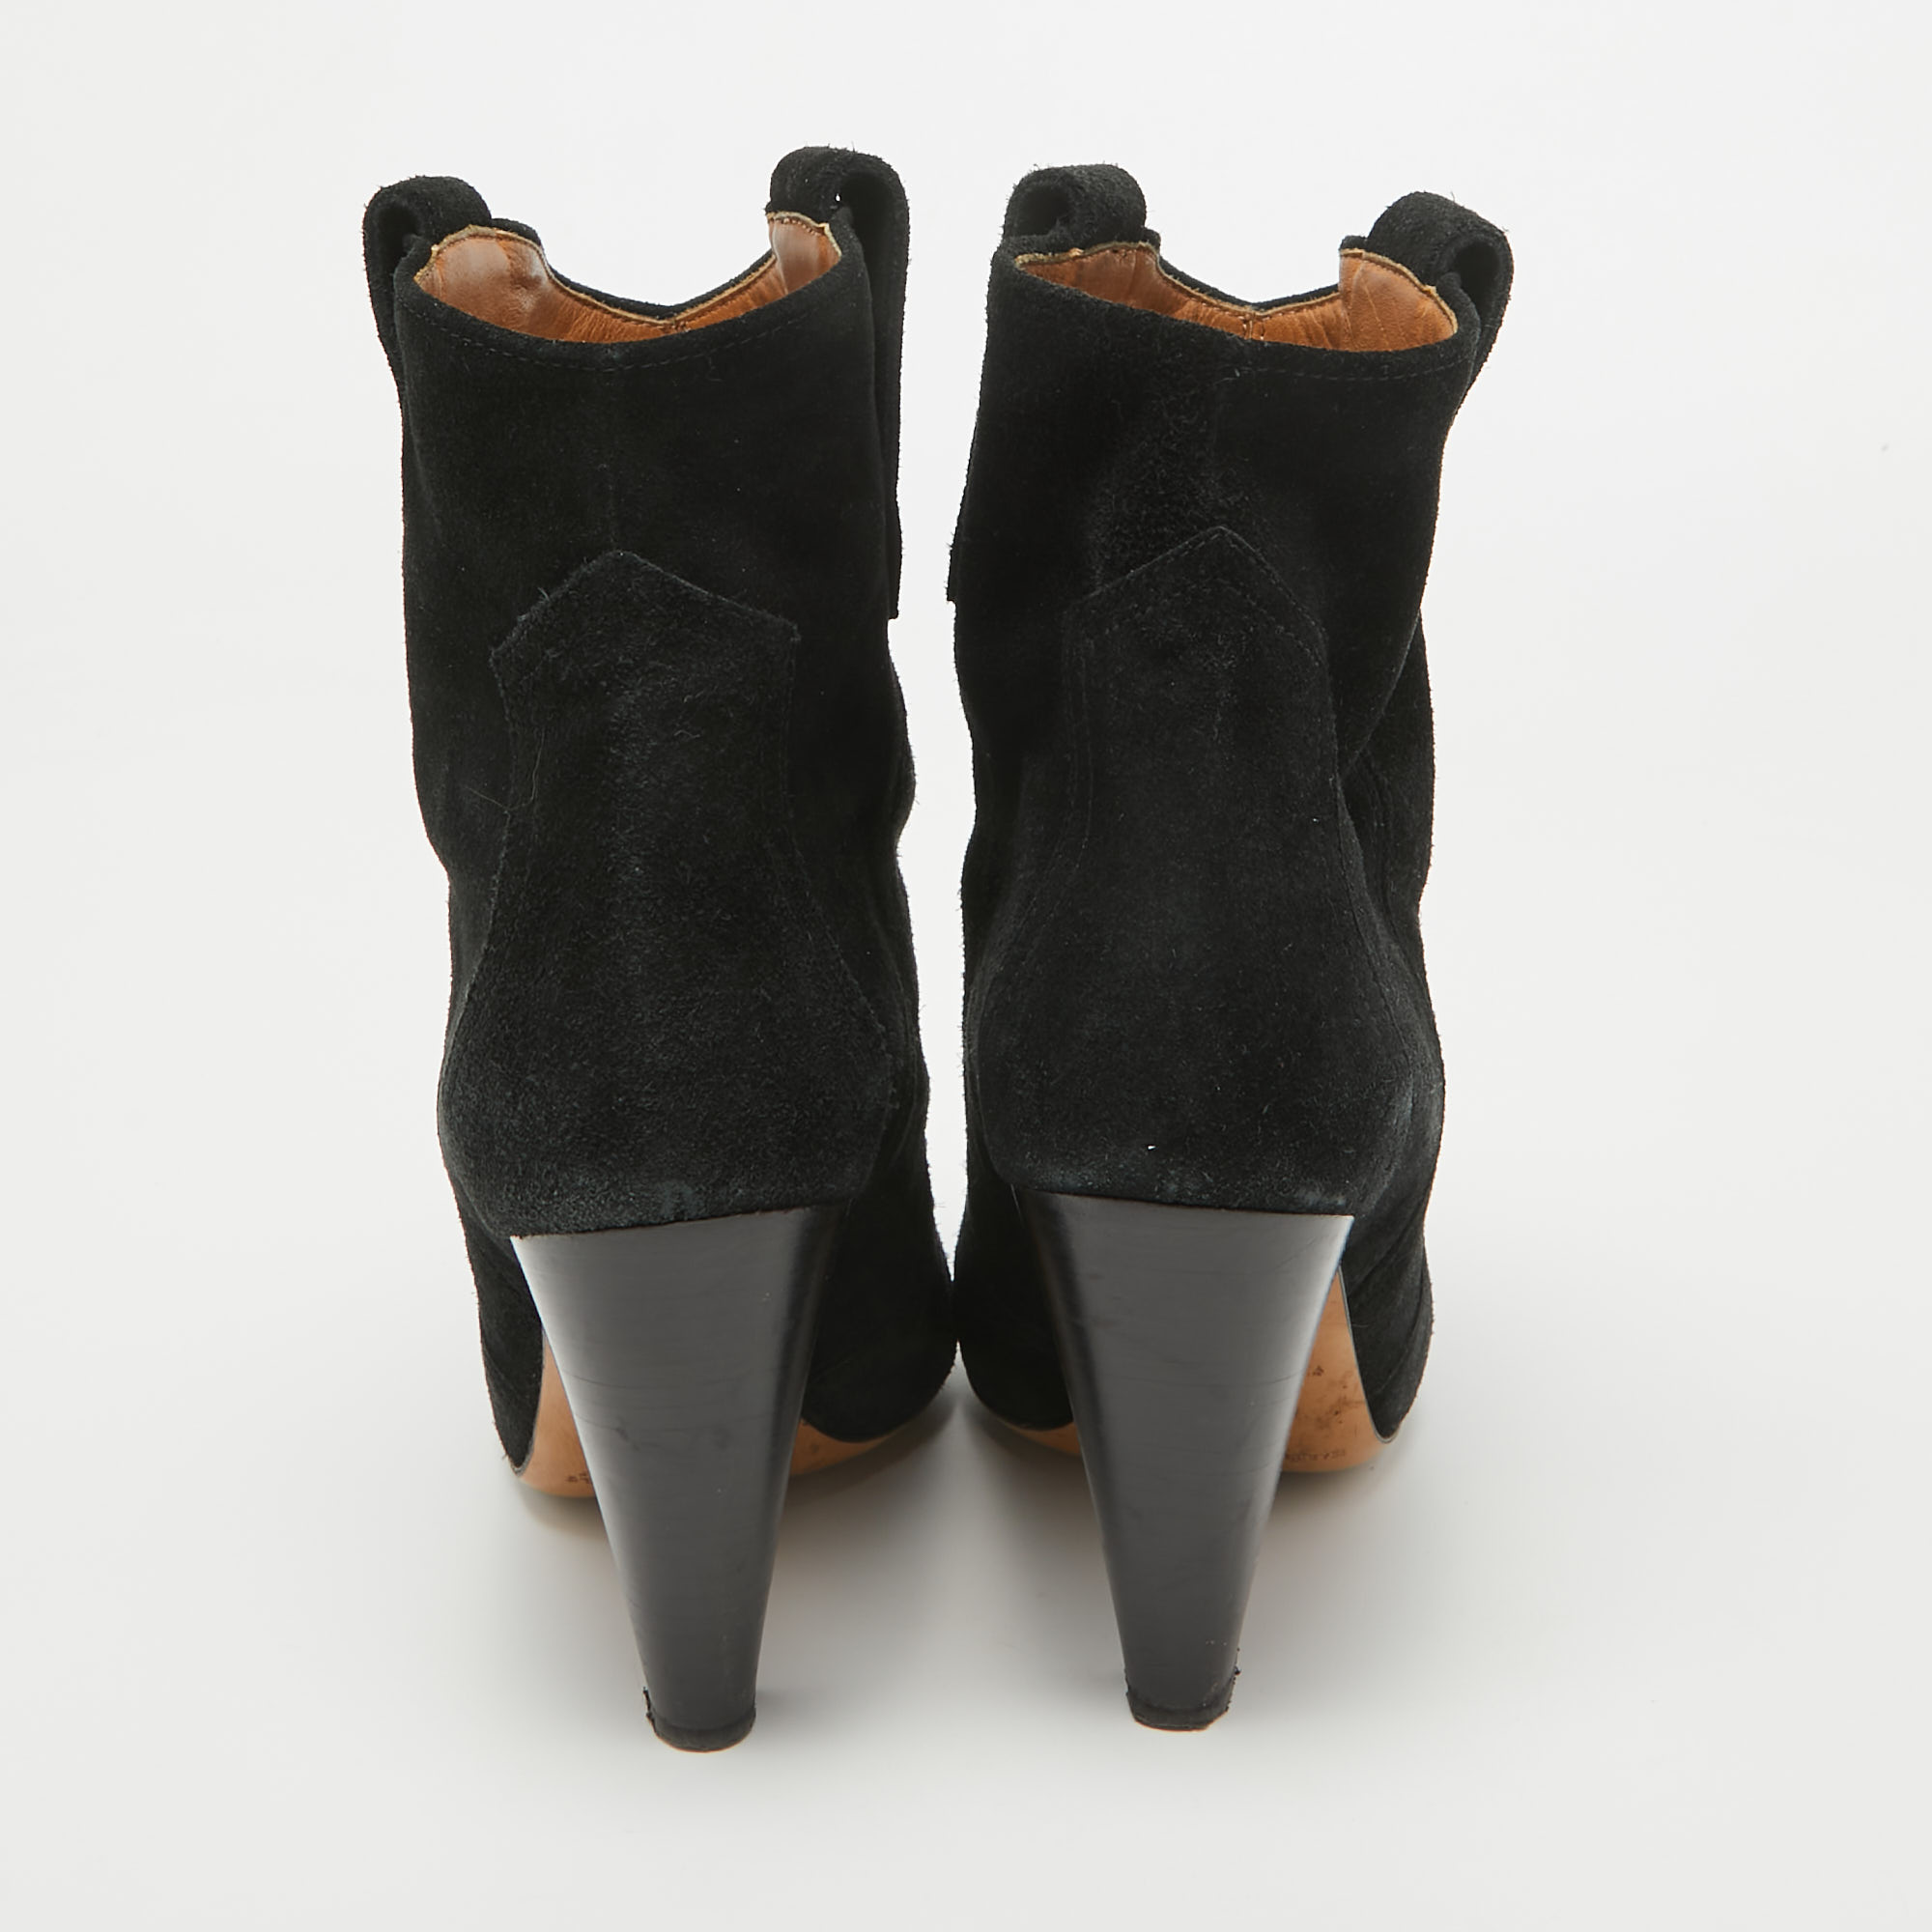 Isabel Marant Black Suede Ankle Boots Size 37